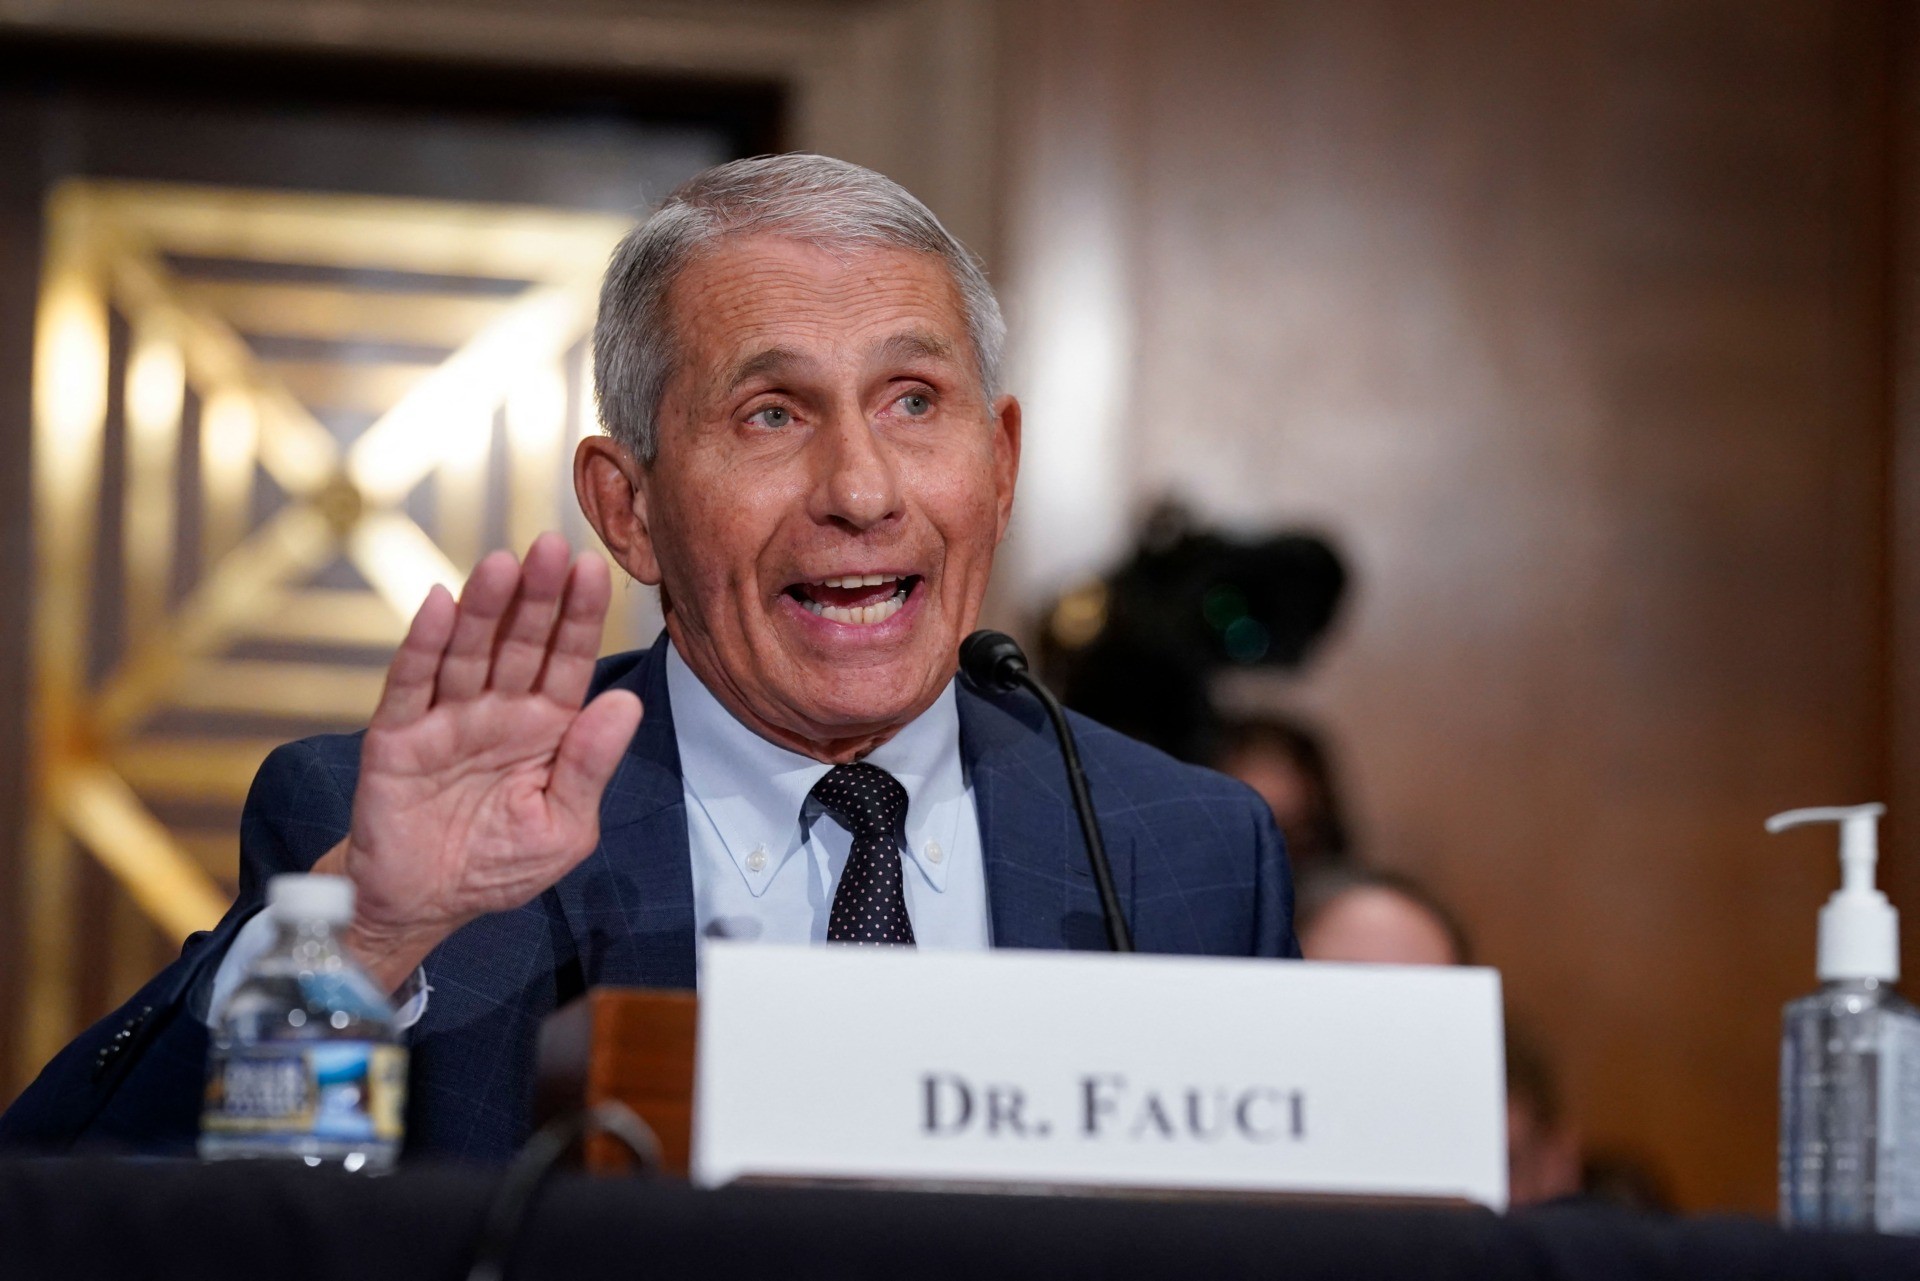 Dr. Anthony Fauci, director of the National Institute of Allergy and Infectious Diseases, responds to questions by Senator Rand Paul during the Senate Health, Education, Labor, and Pensions Committee hearing on Capitol Hill in Washington, DC on July 20, 2021. (Photo by J. Scott Applewhite / POOL / AFP) (Photo by J. SCOTT APPLEWHITE/POOL/AFP via Getty Images)